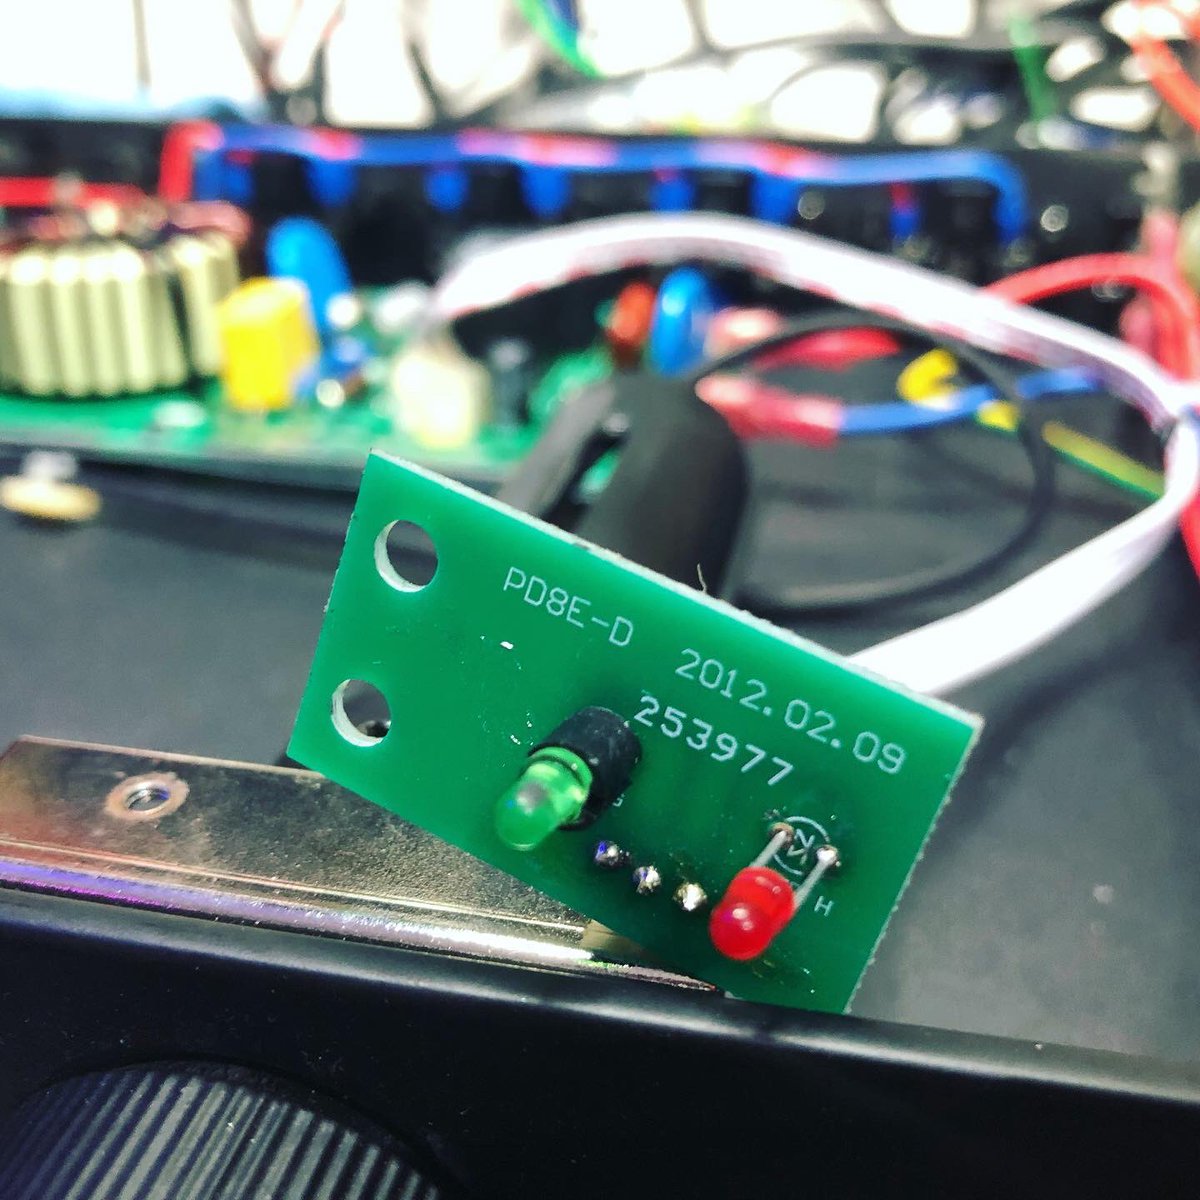 A #powerconditioner that went down after snapping in the #rackmount cabinet. The front panel has been remounted and torn #wiring repaired. The red/green #lights have also been replaced. Job done 👍 #musicequipment #repairs #fixingthings